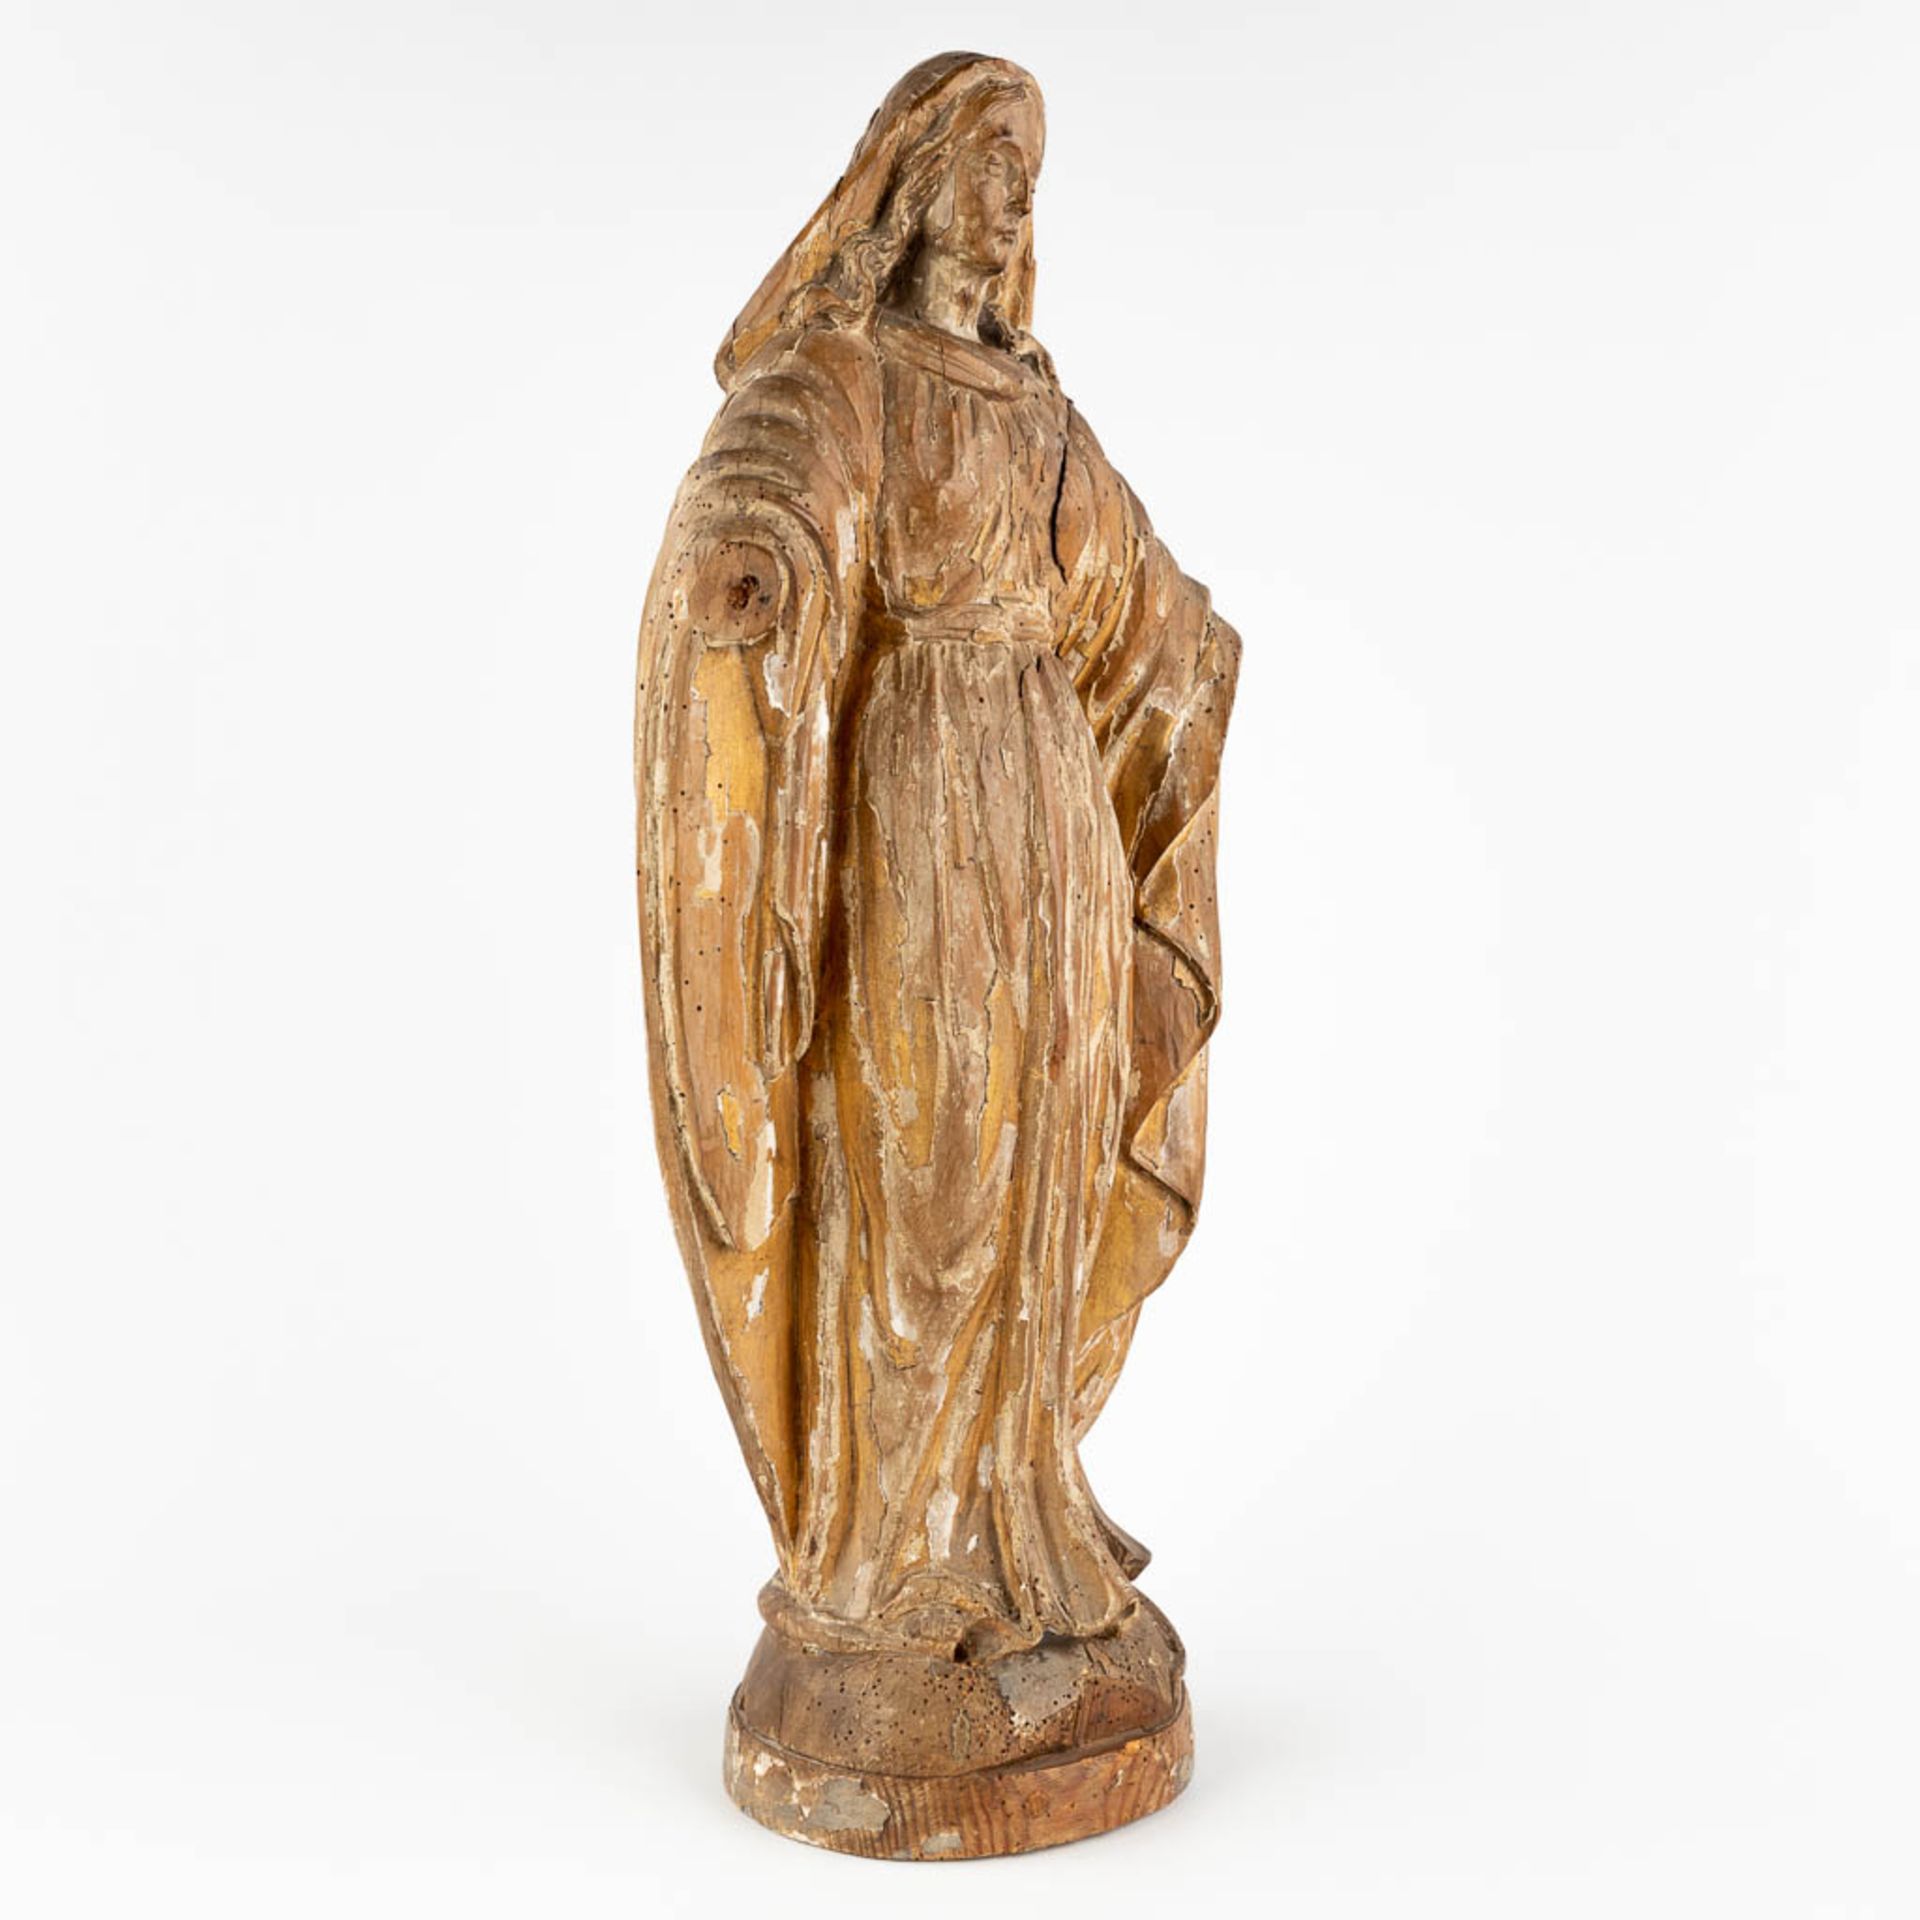 A wood-sculptured Madonna, remains of the original patina. 18th C. (D:15 x W:26 x H:62 cm) - Image 3 of 14